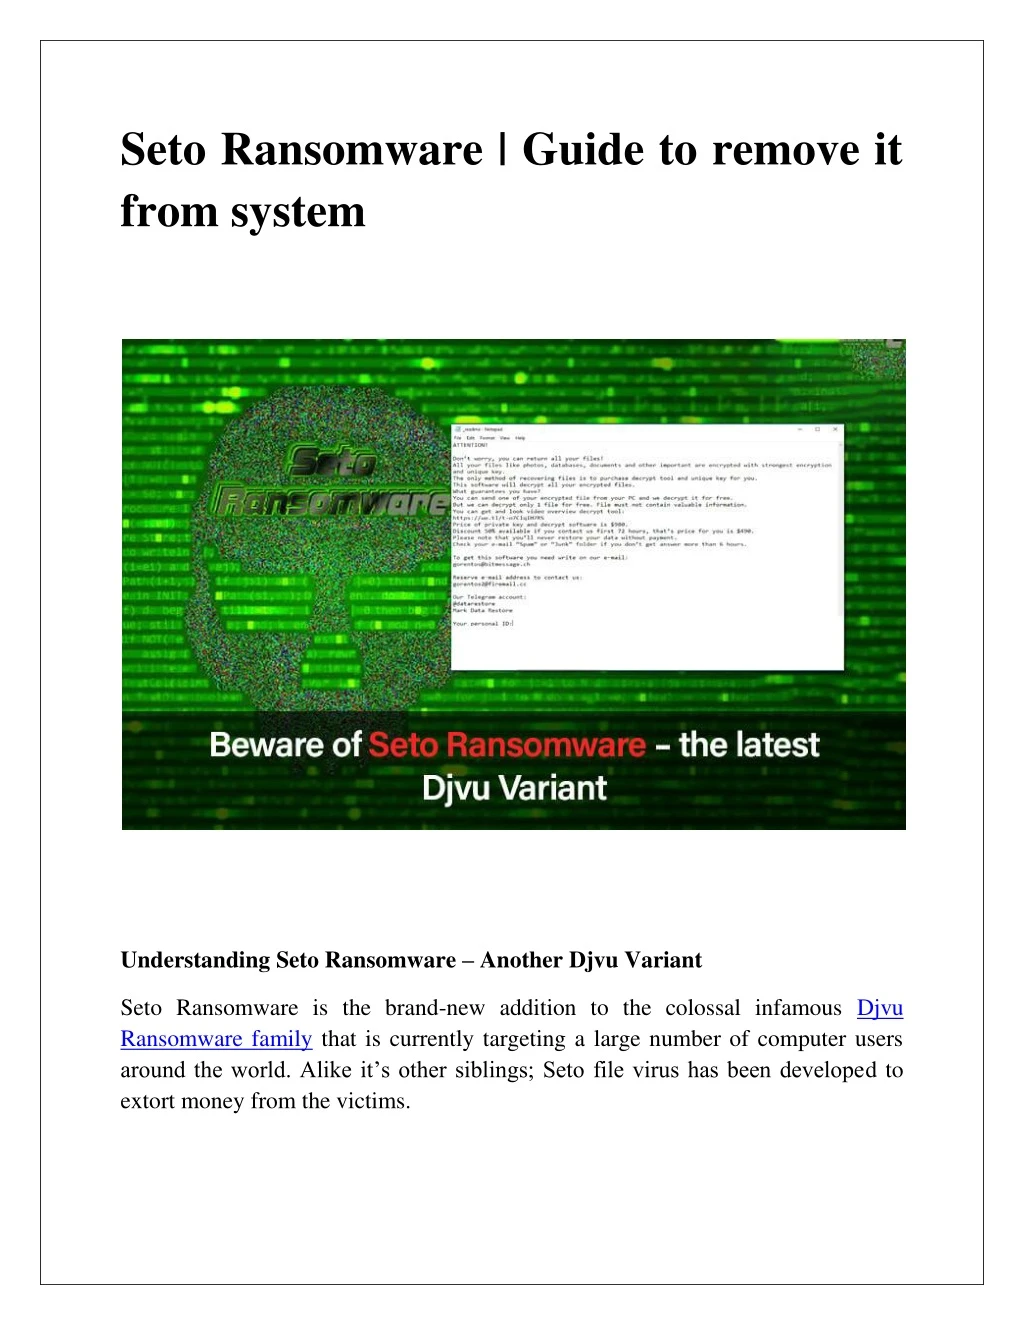 seto ransomware guide to remove it from system